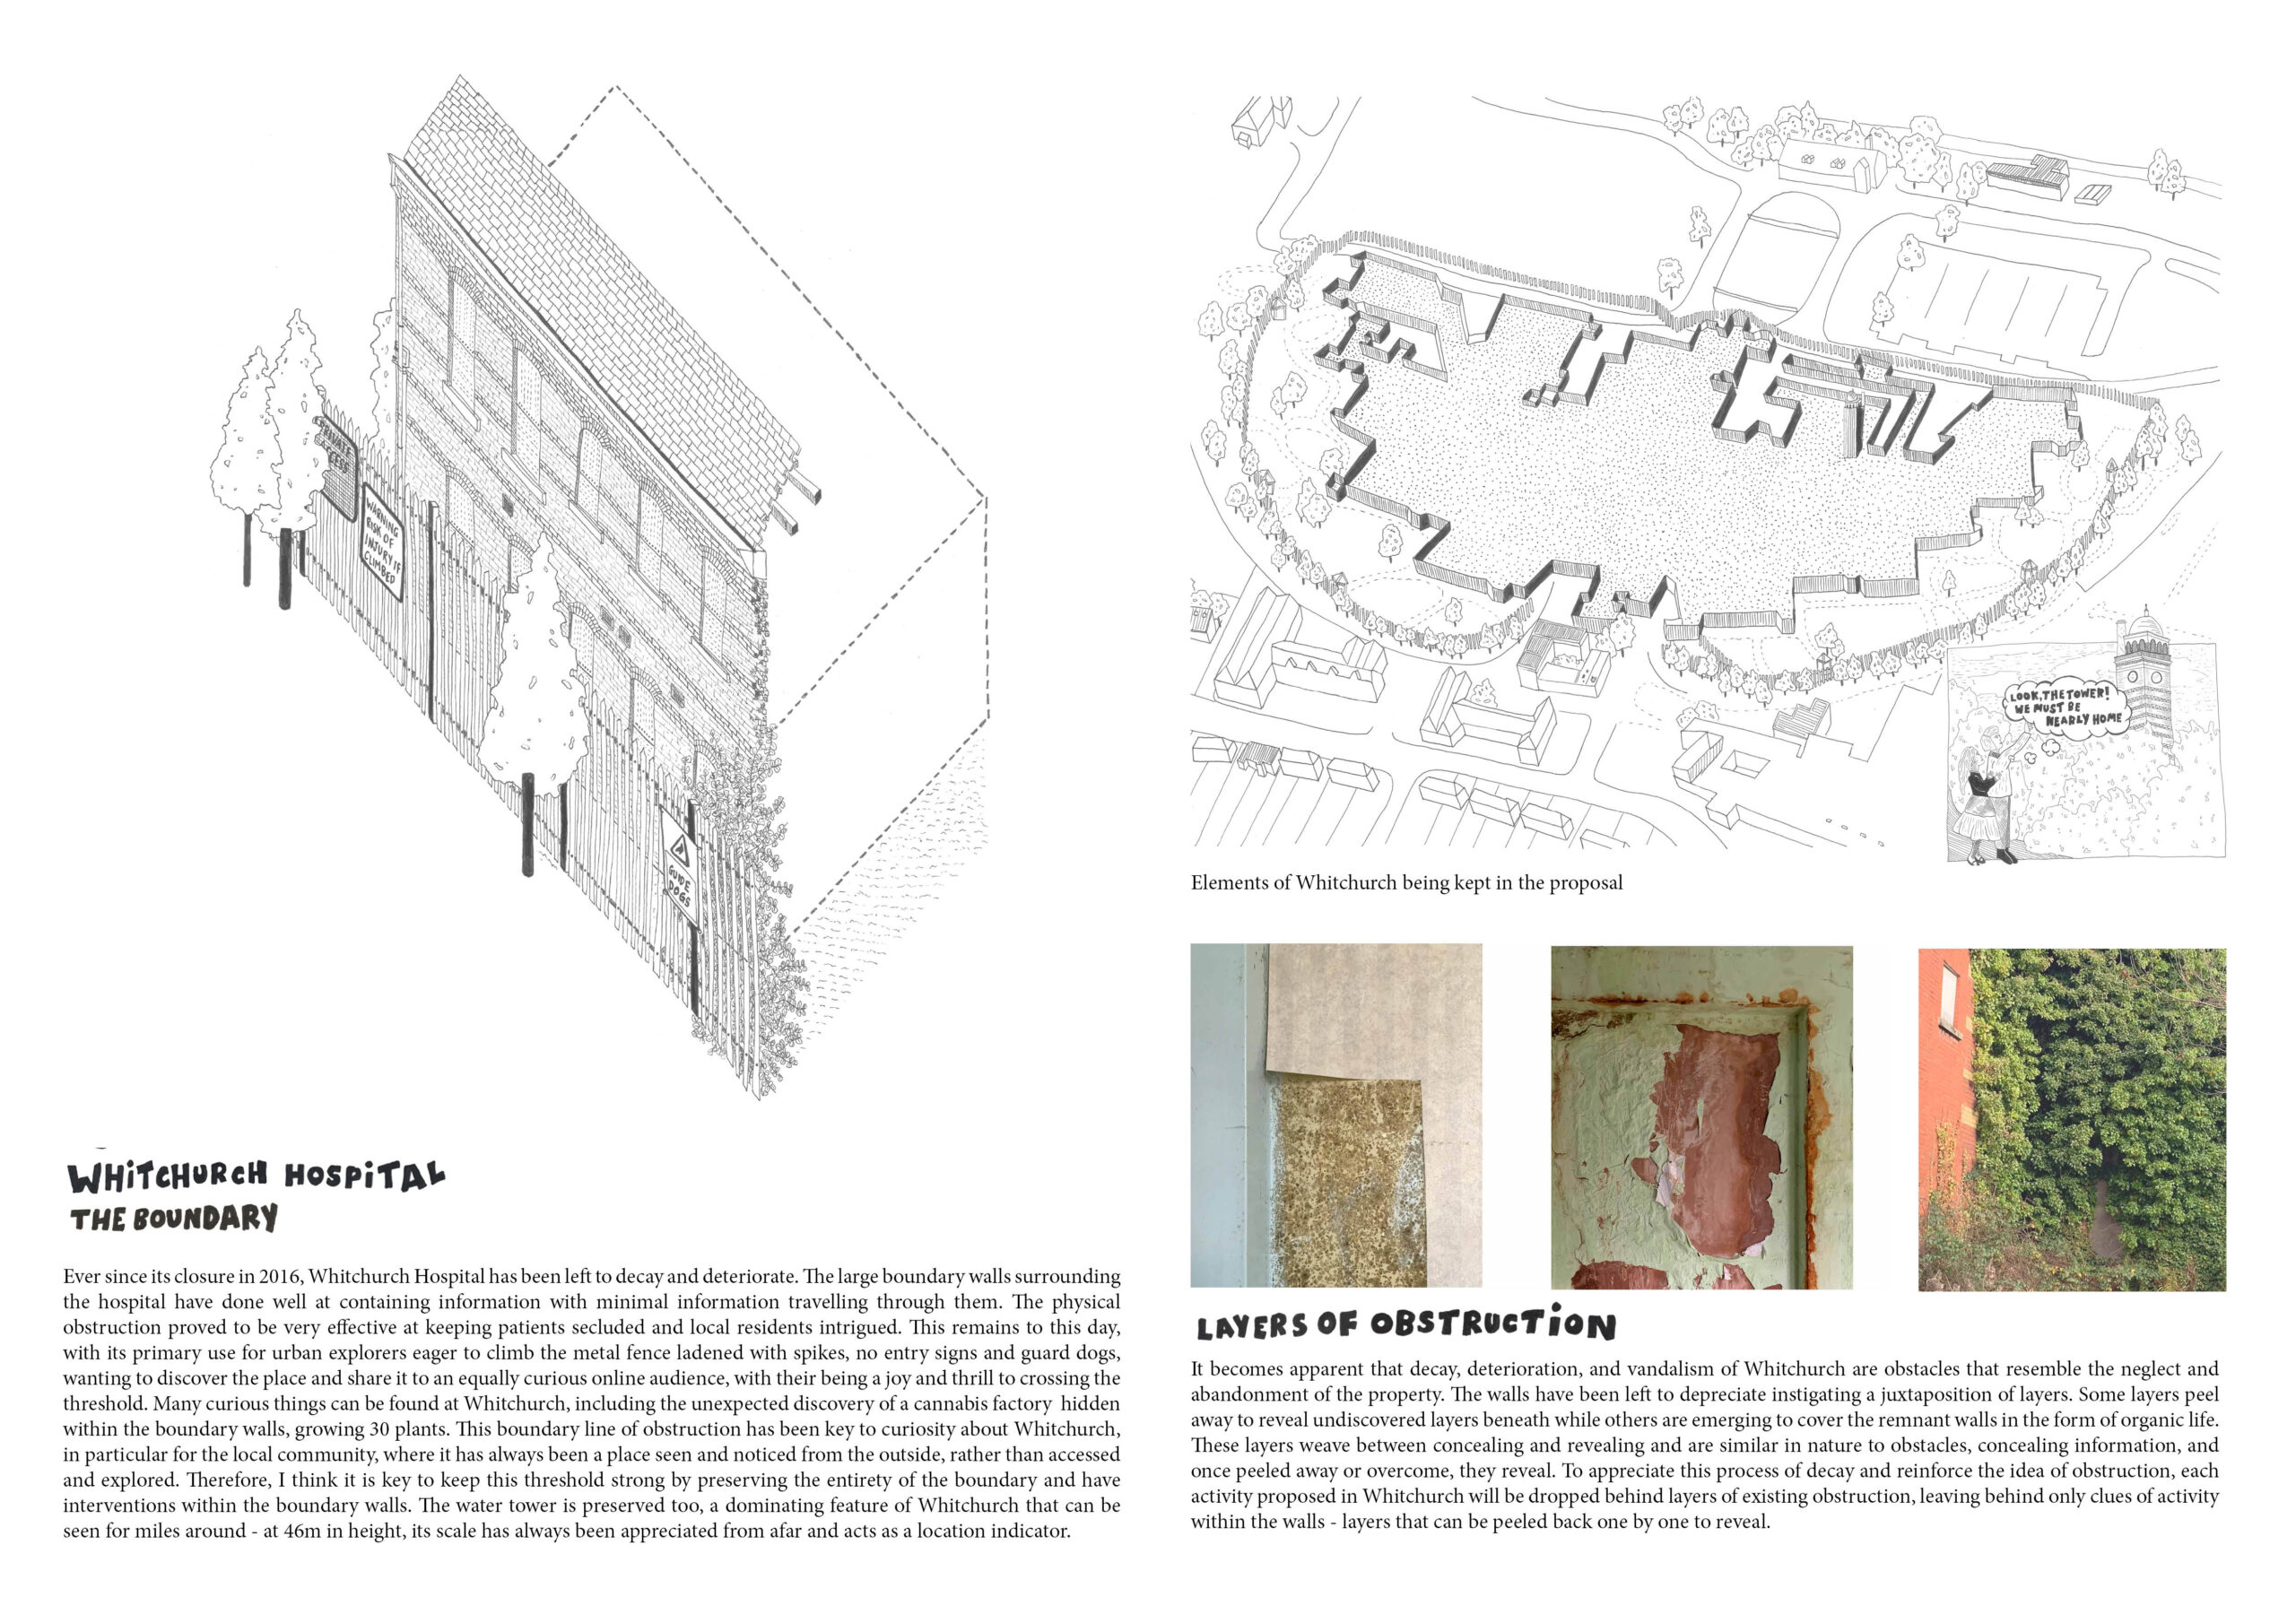 Portfolio Page of the Boundary Wall and Decay of the interior, layers oscillating between concealing and revealing forms.